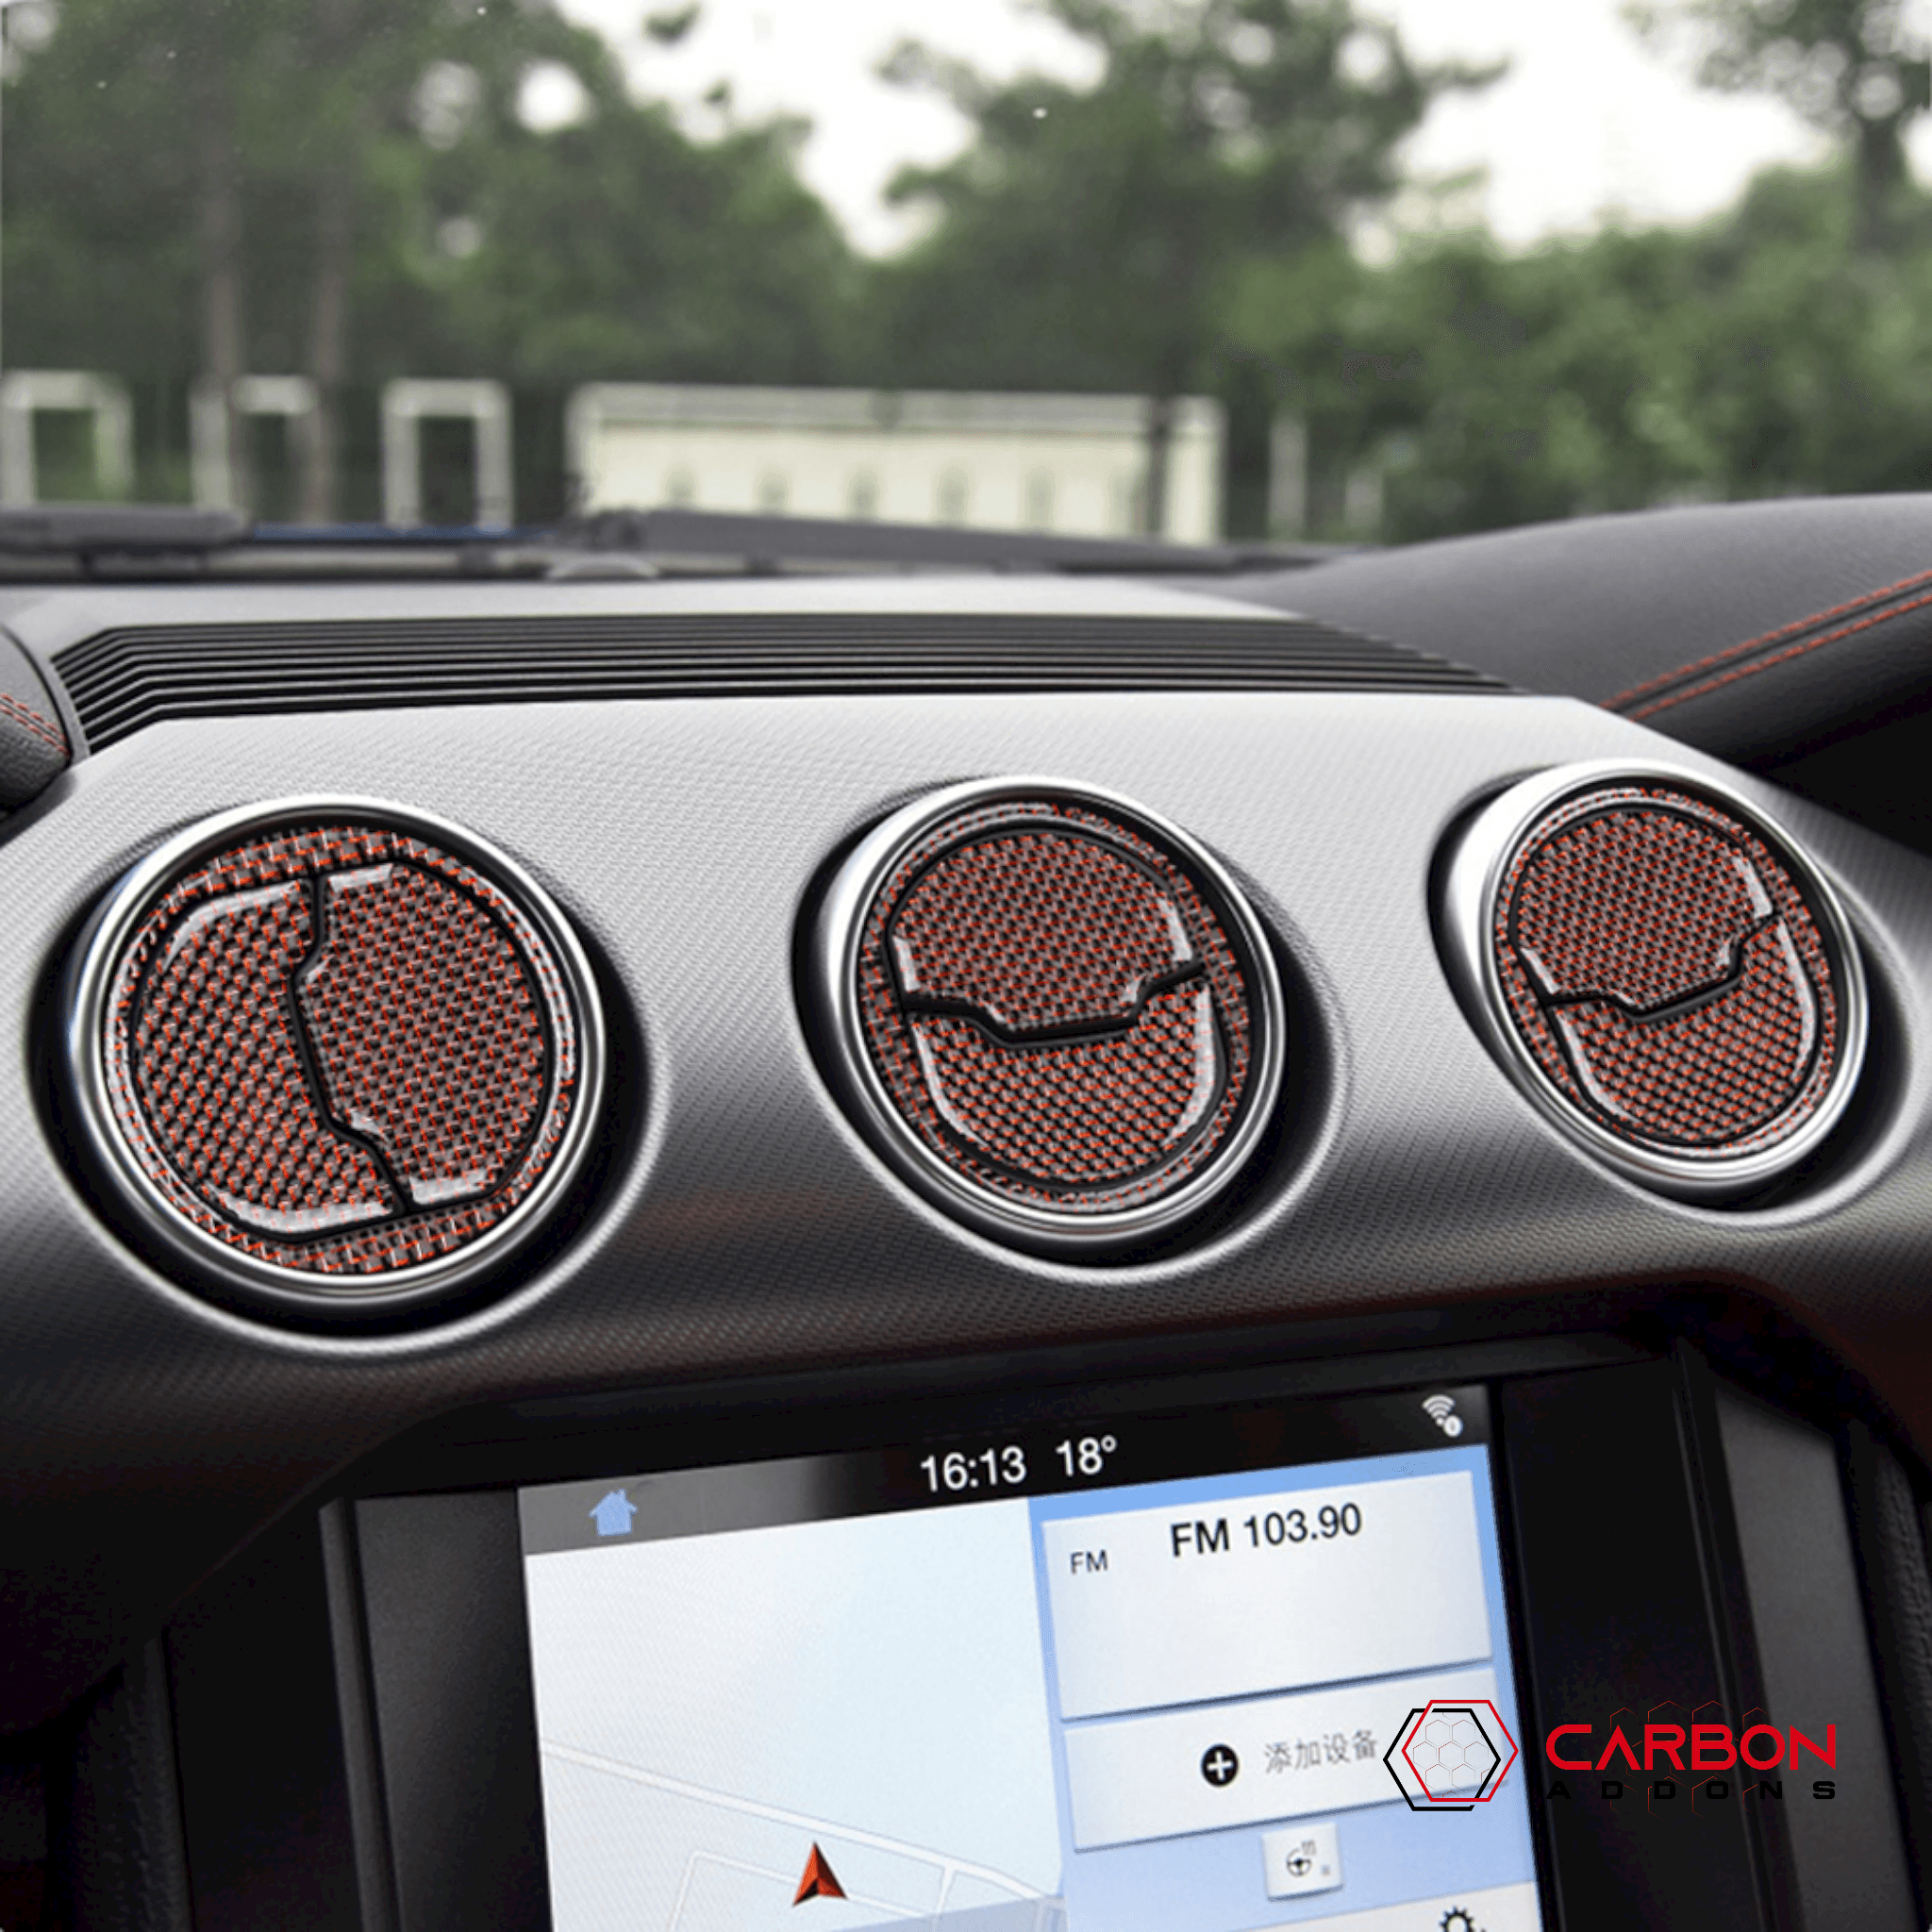 Reflective Carbon Fiber Center Air Vent Outlet Trim Overlay for Ford Mustang 2015-2023 - carbonaddons Carbon Fiber Parts, Accessories, Upgrades, Mods